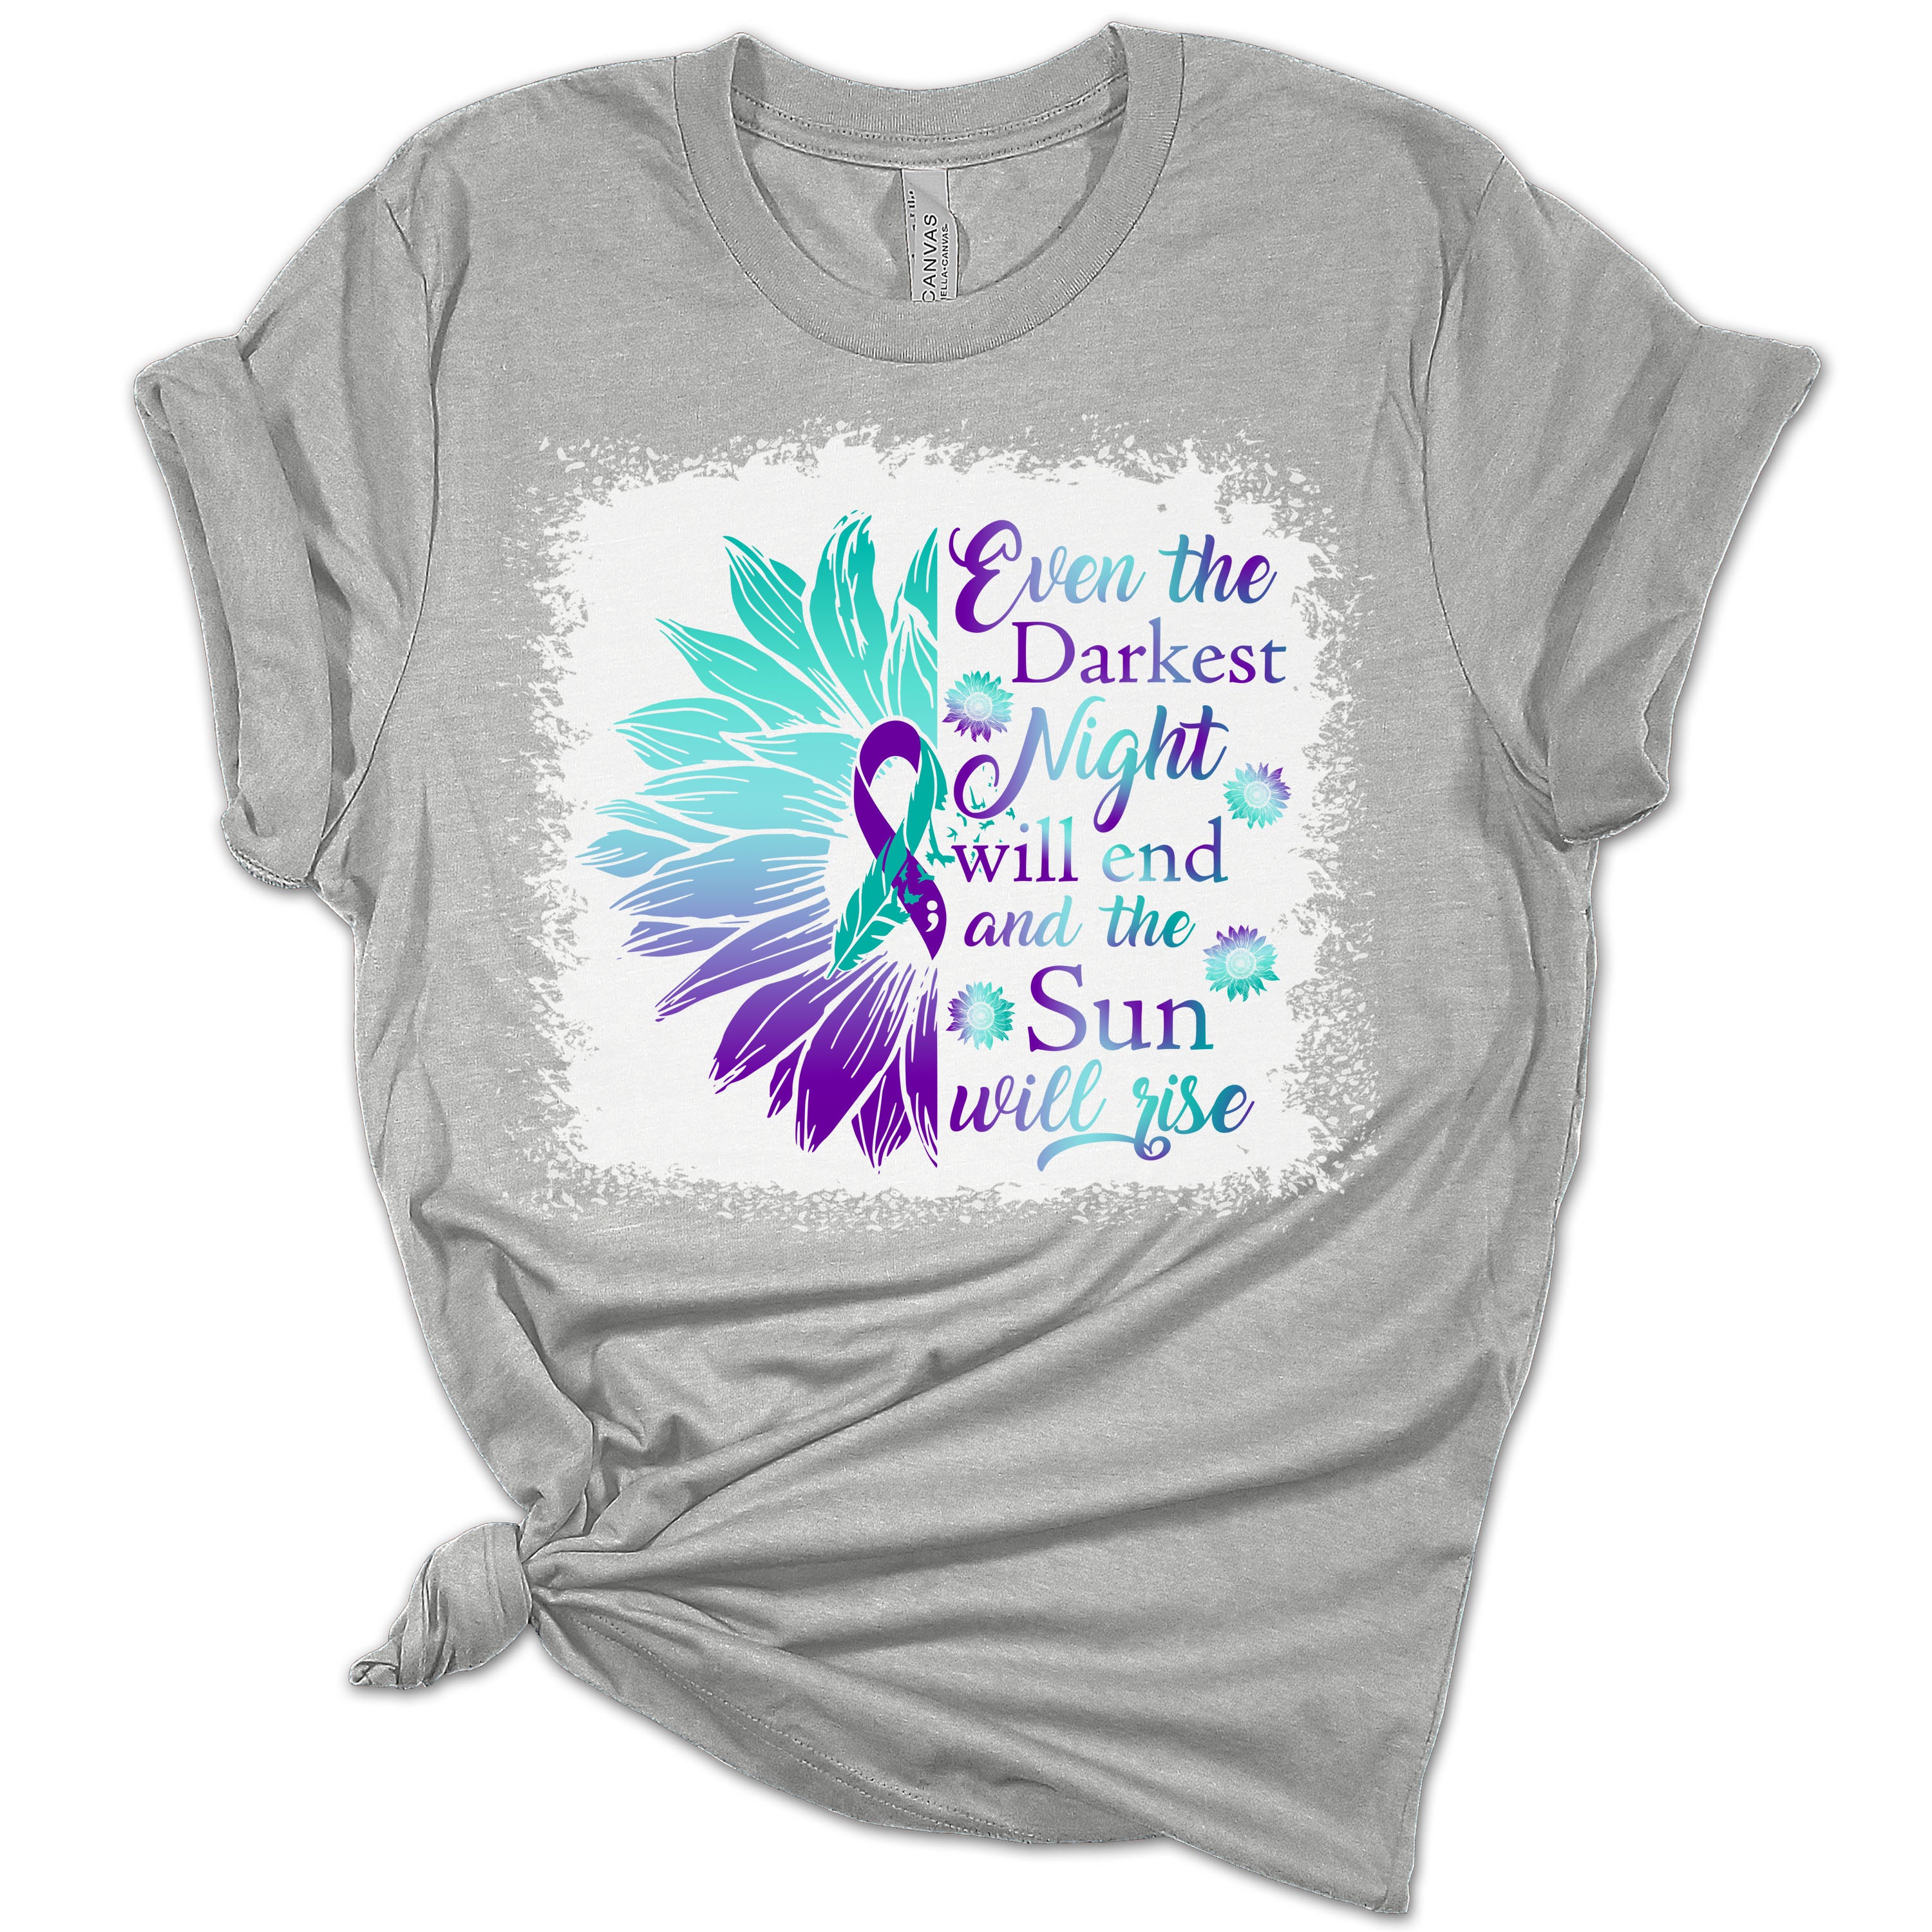 Even The Darkest Night Suicide Prevention Shirt Mental Health Awareness Tshirt Graphic Tees For Women